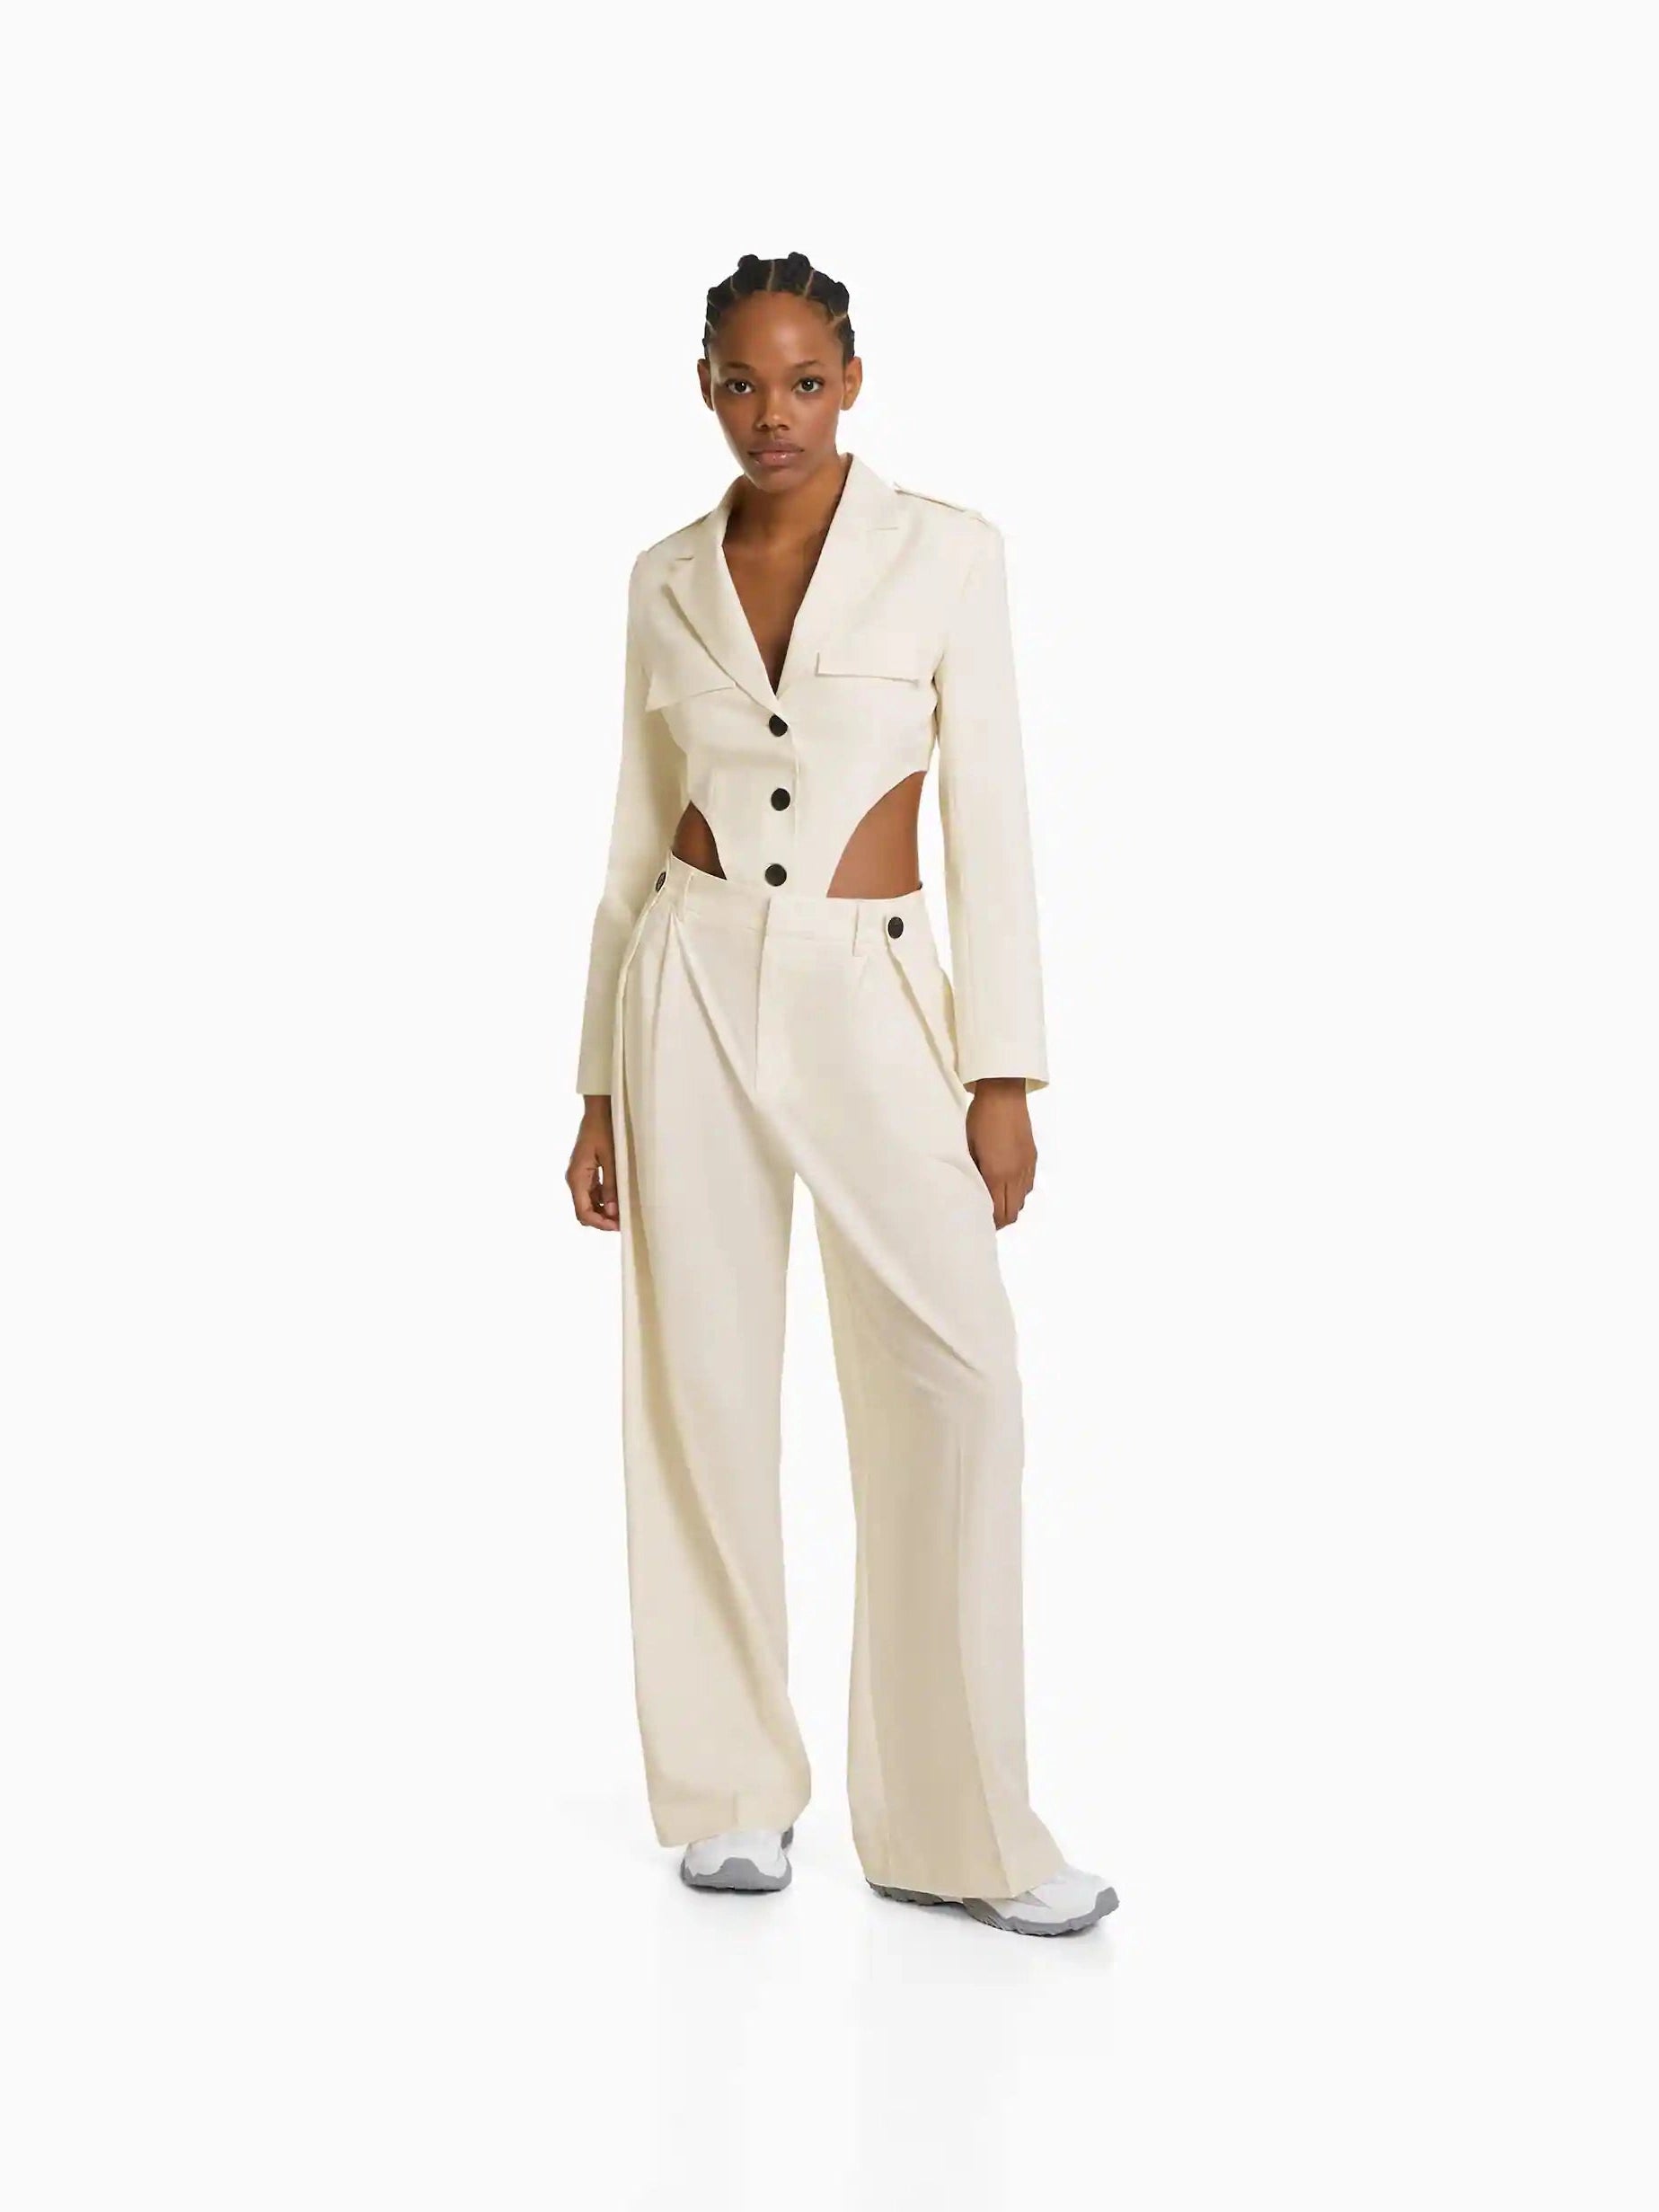 Trouser Suits for Women Sale Elegant 2 Piece Outfits Casual Smart Lattice  Sets Plaid Checked Blazer Jackets with Long Pants Ladies Blazer Suit Set  for Going Out Wedding Special Occasions - Walmart.com